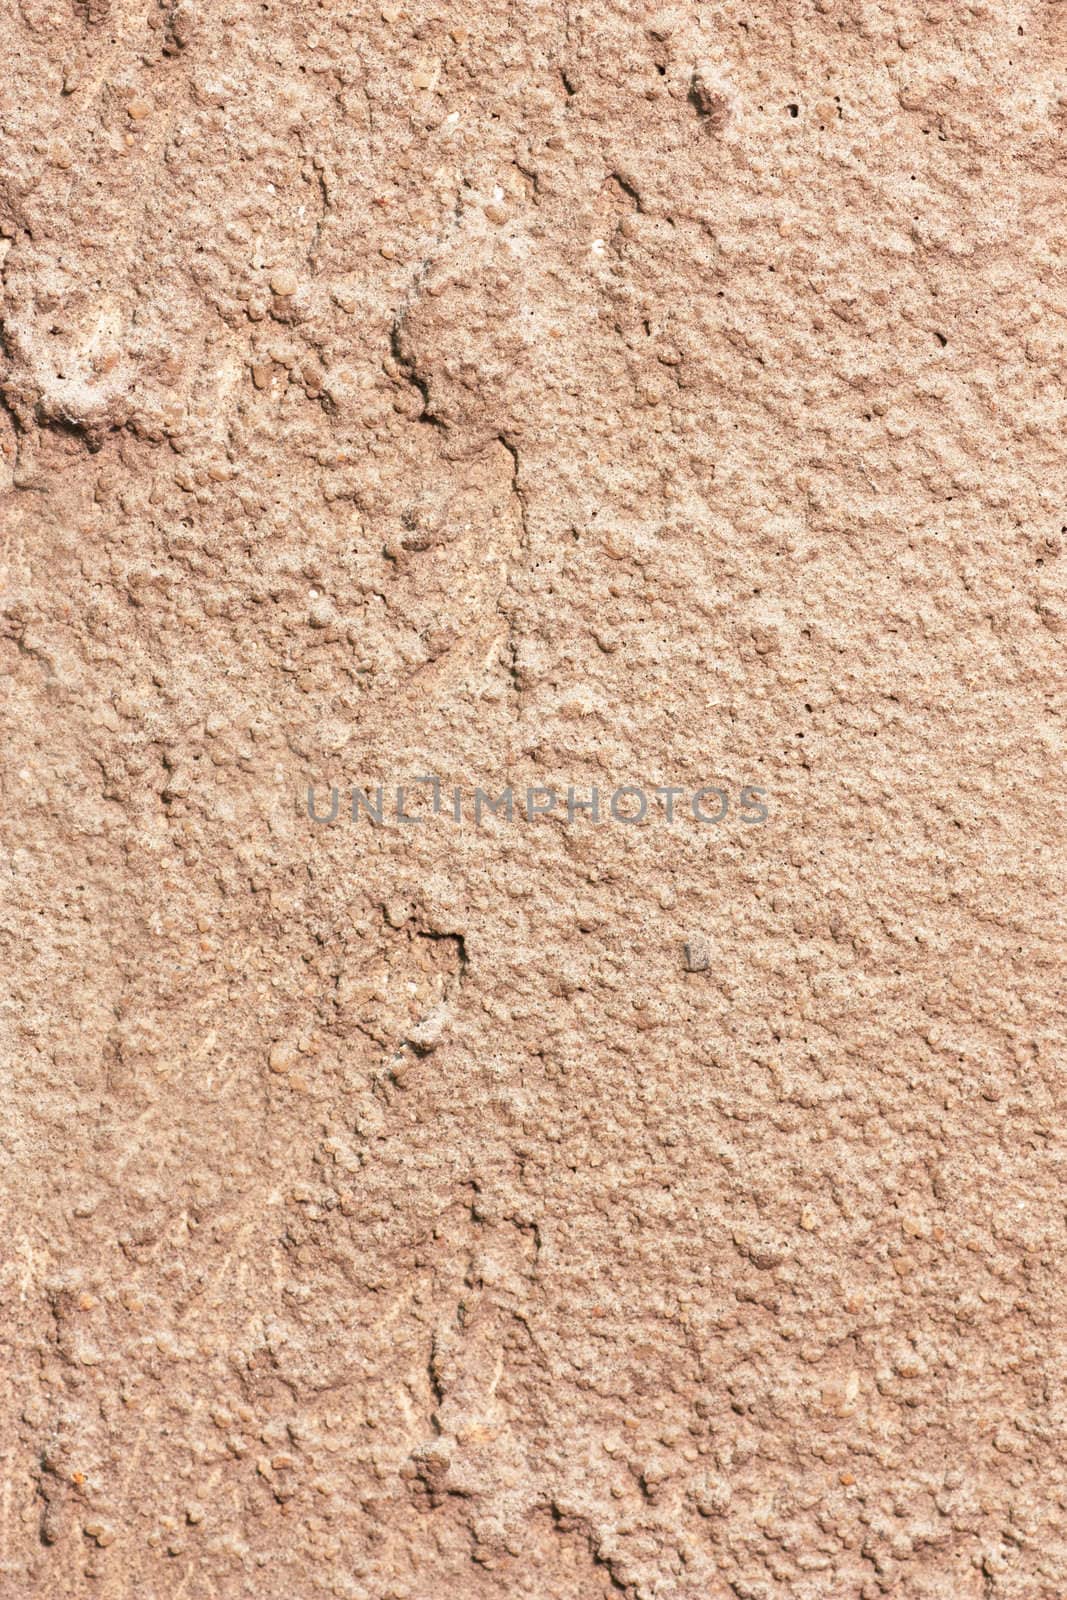 Macro view of cement wall. Rough texture